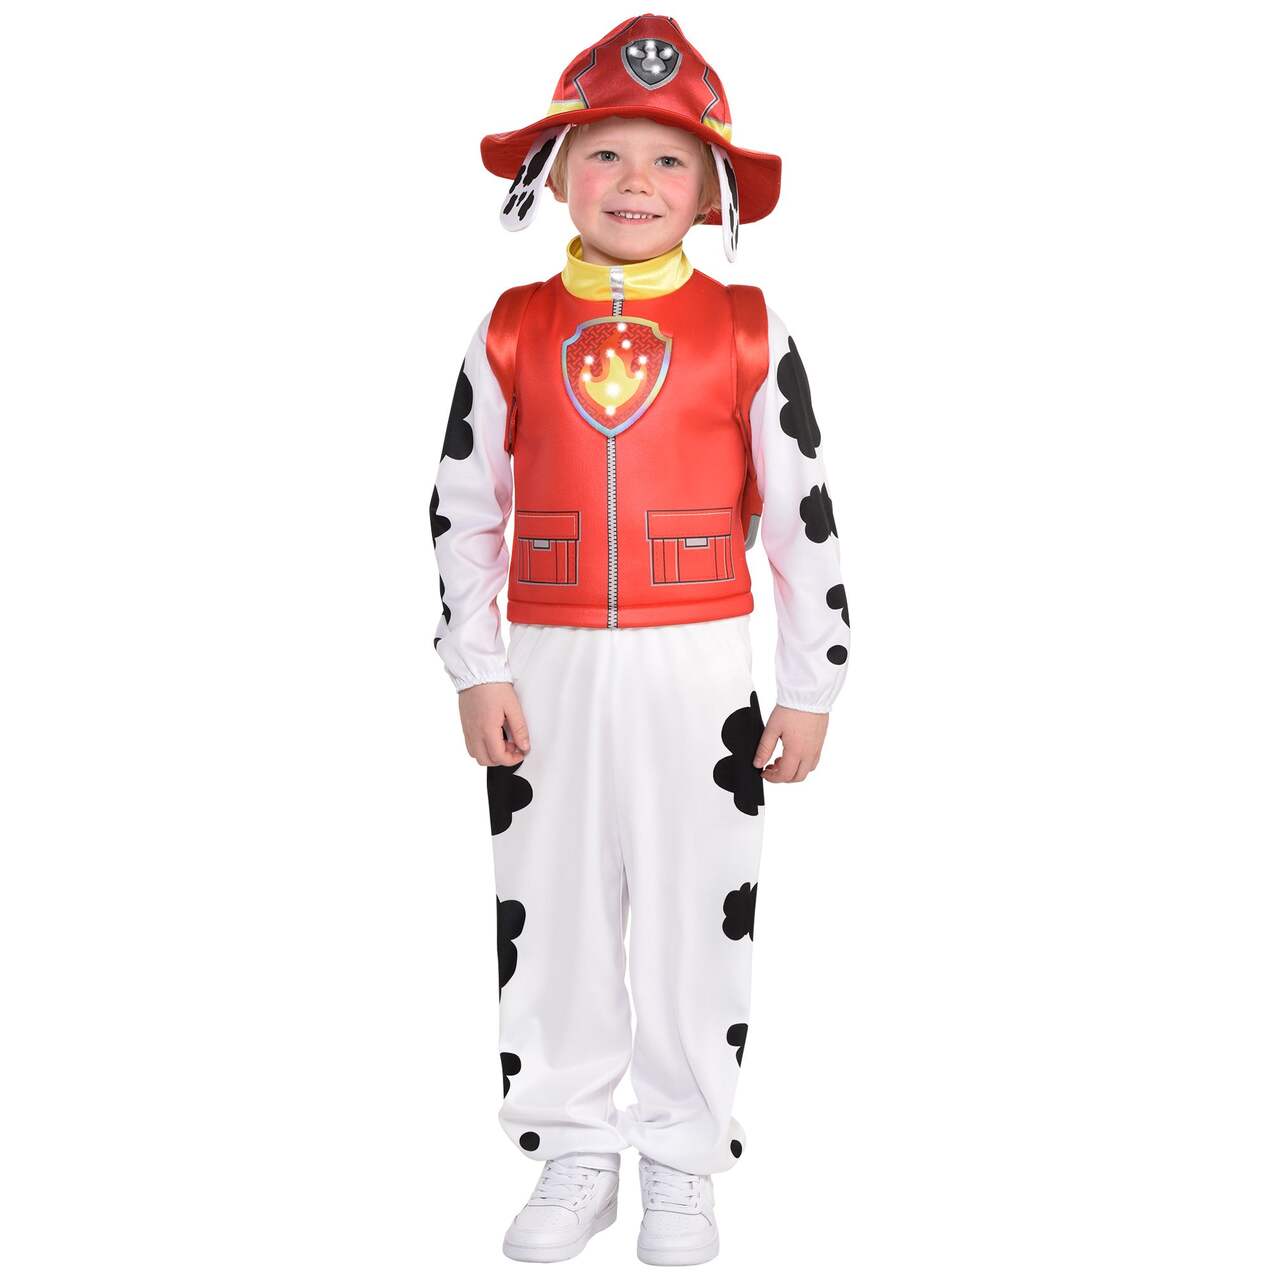 https://media-www.canadiantire.ca/product/automotive/party-city-seasonal/party-city-halloween-costumes/8549682/215-child-paw-patrol-chase-light-up-boy-costume-small-4-6--6f17e773-7e02-4432-8510-7397491d186c-jpgrendition.jpg?imdensity=1&imwidth=640&impolicy=mZoom